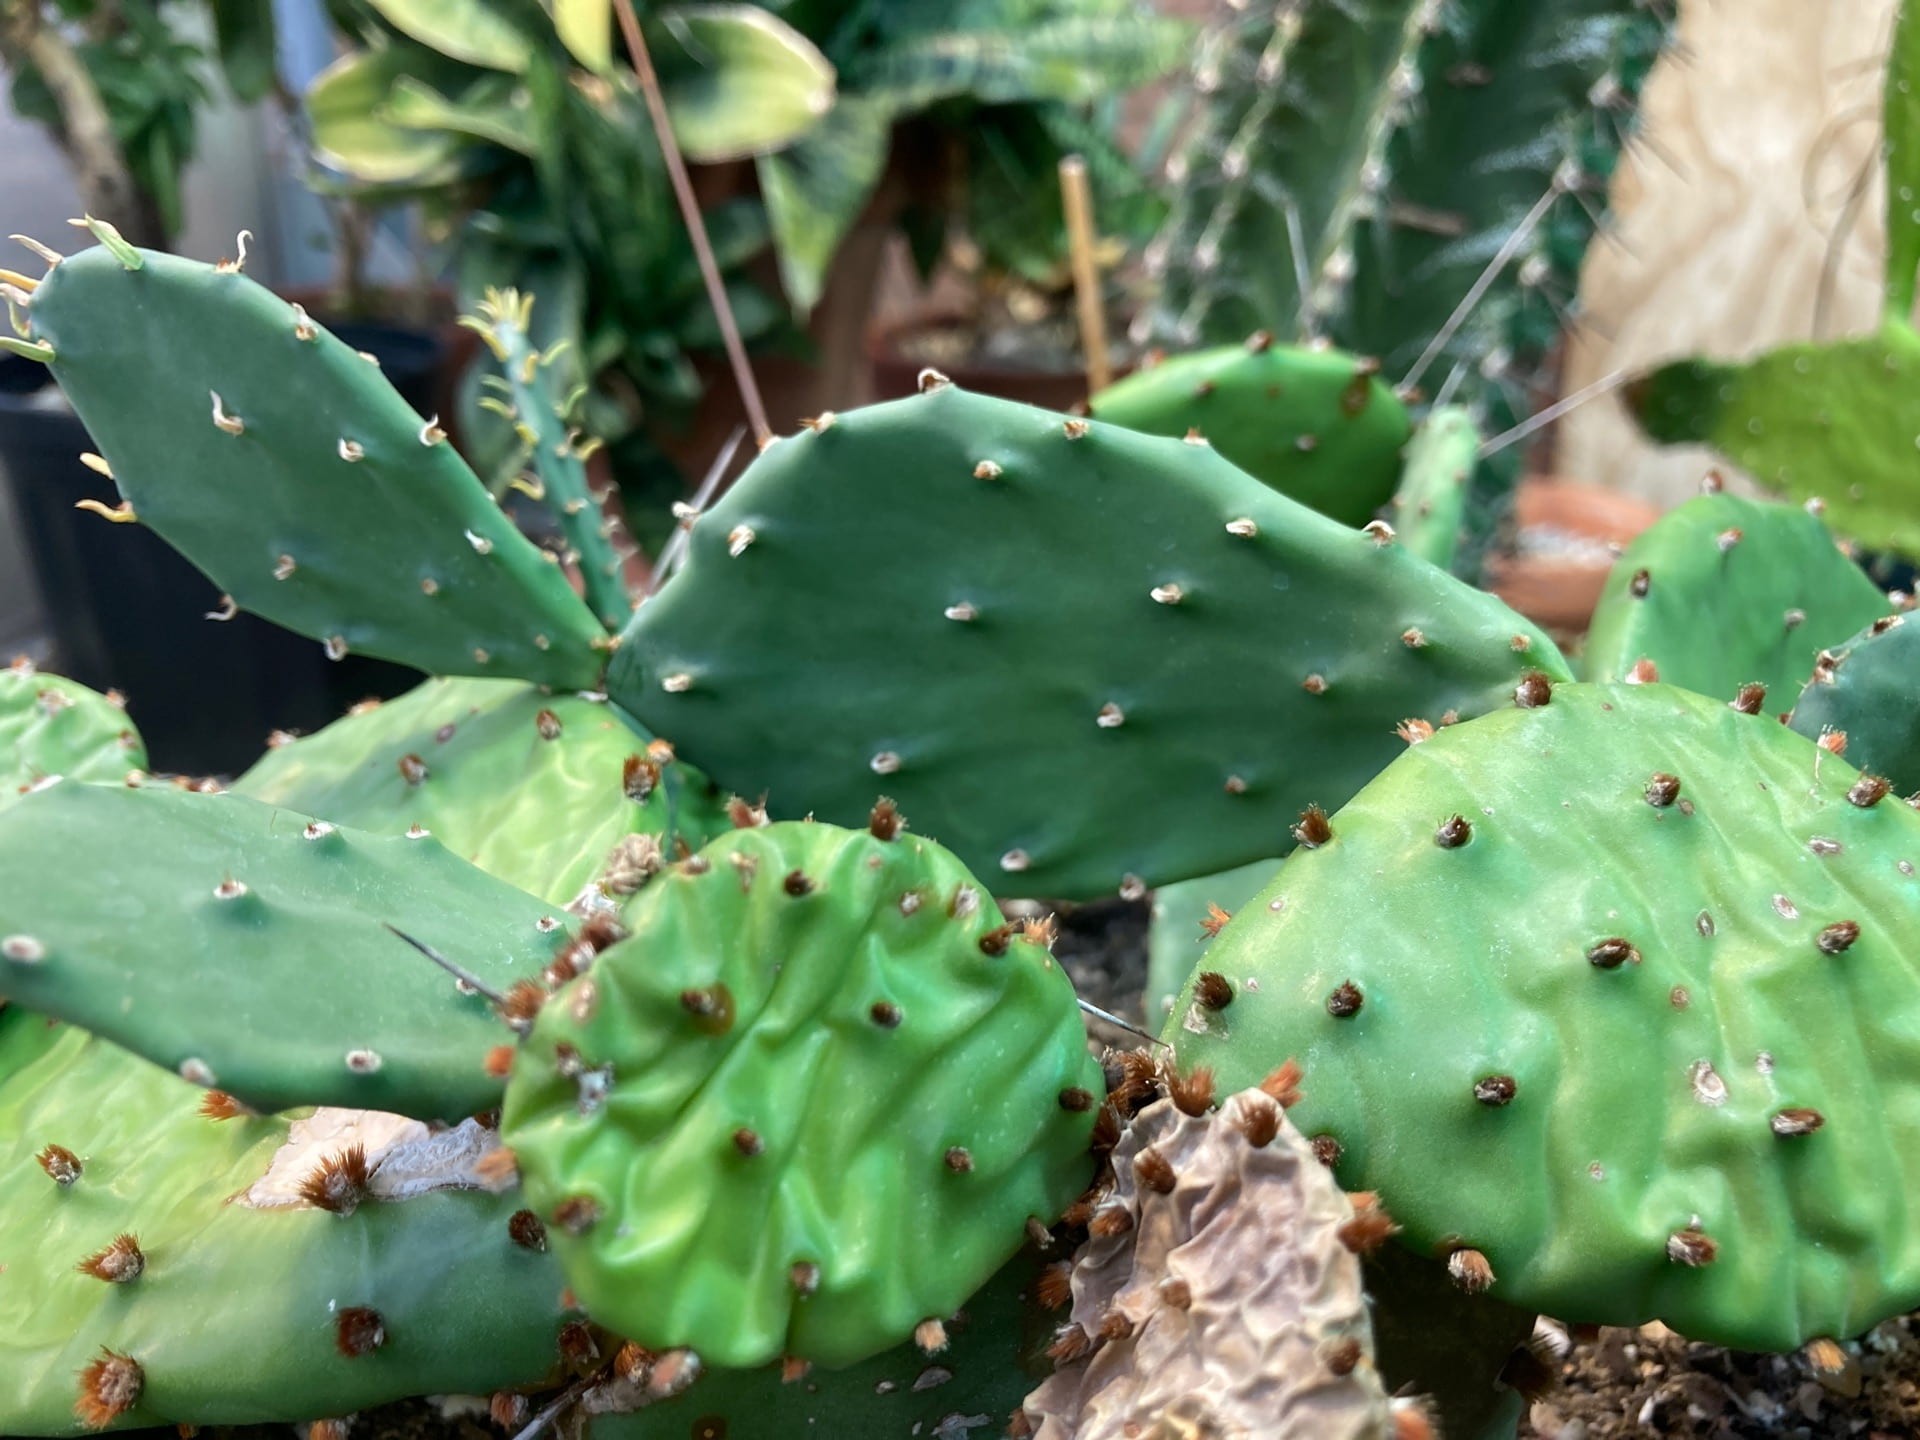 Opuntia humifusa, the prickly pear, is a native food source to North America. Both the fruits and pads are eaten, after the spines are removed of course.